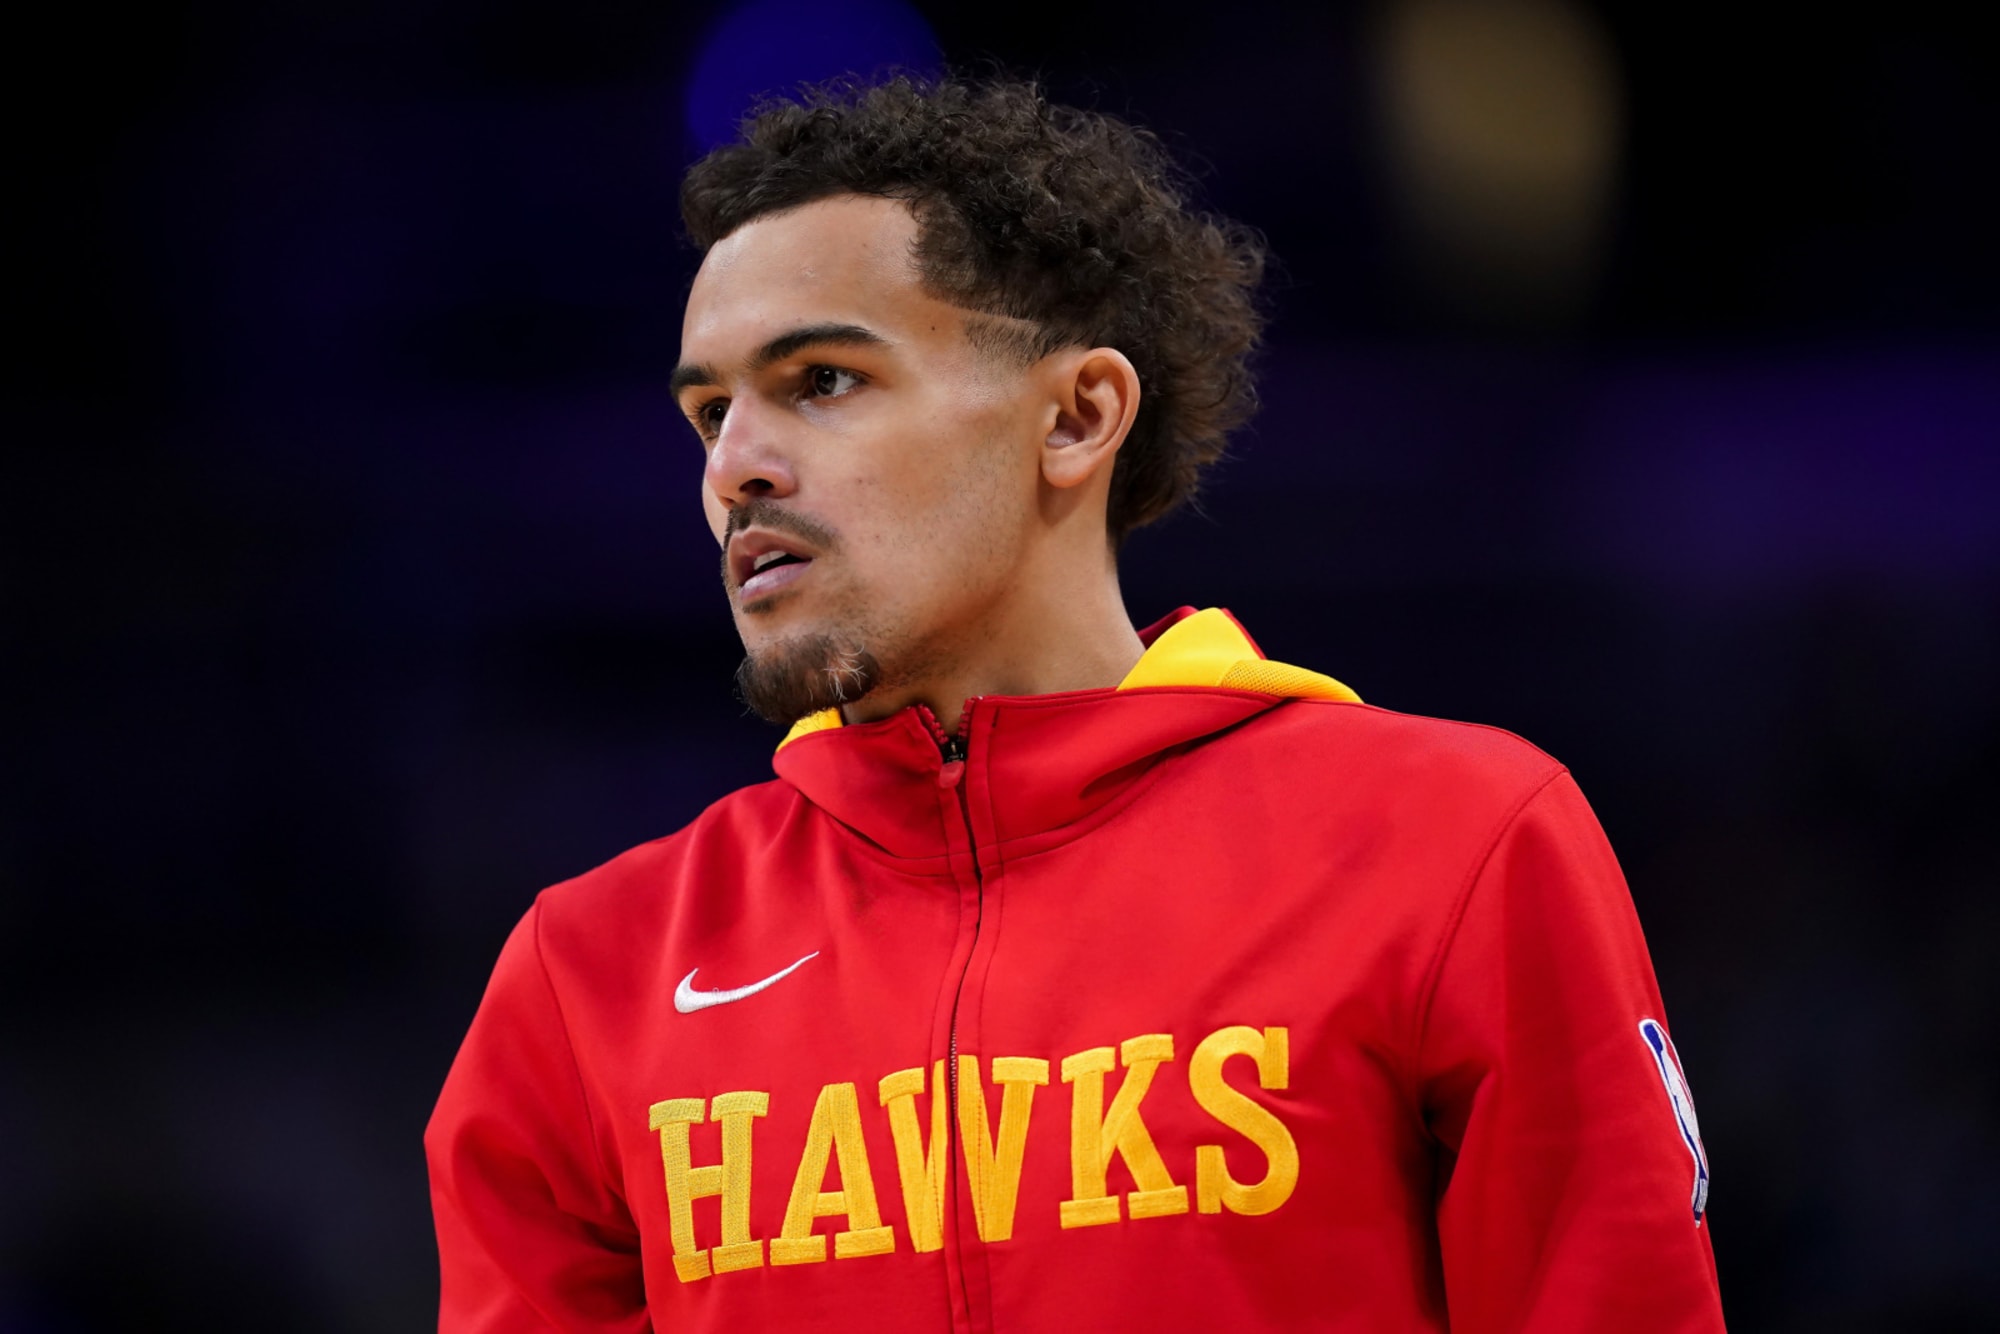 Trae Young's surprising signature sneaker debut